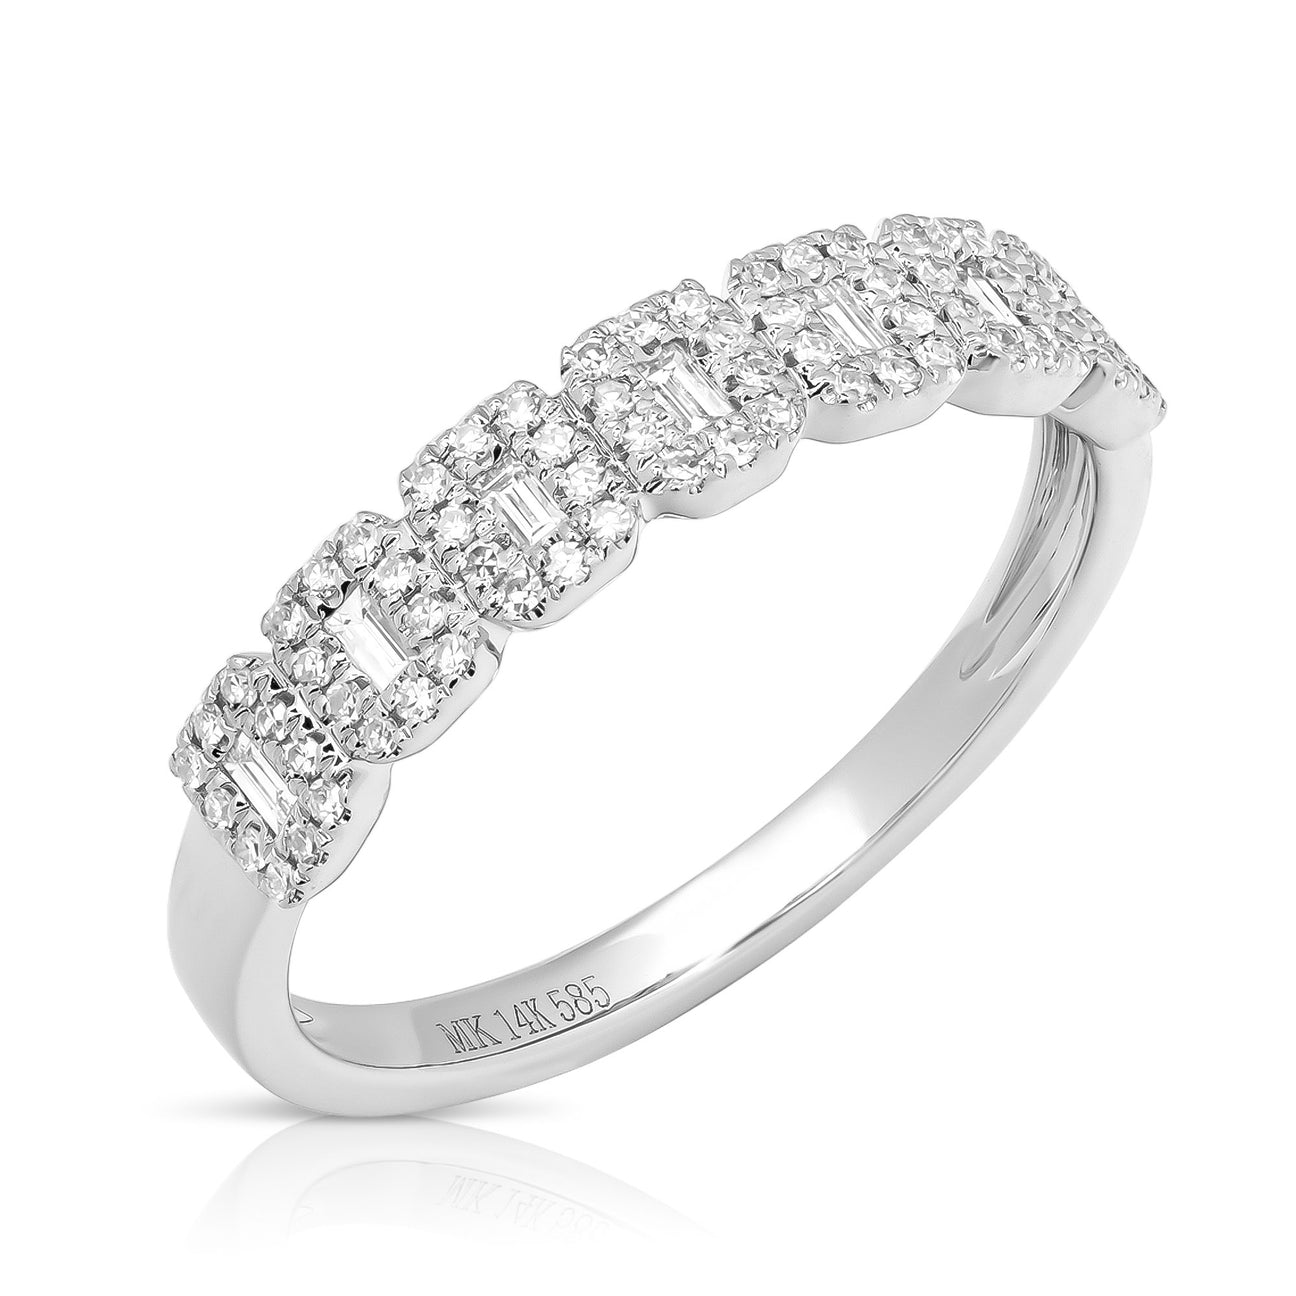 JustDesi Seven Stone Baguette Halo Ring in White Gold